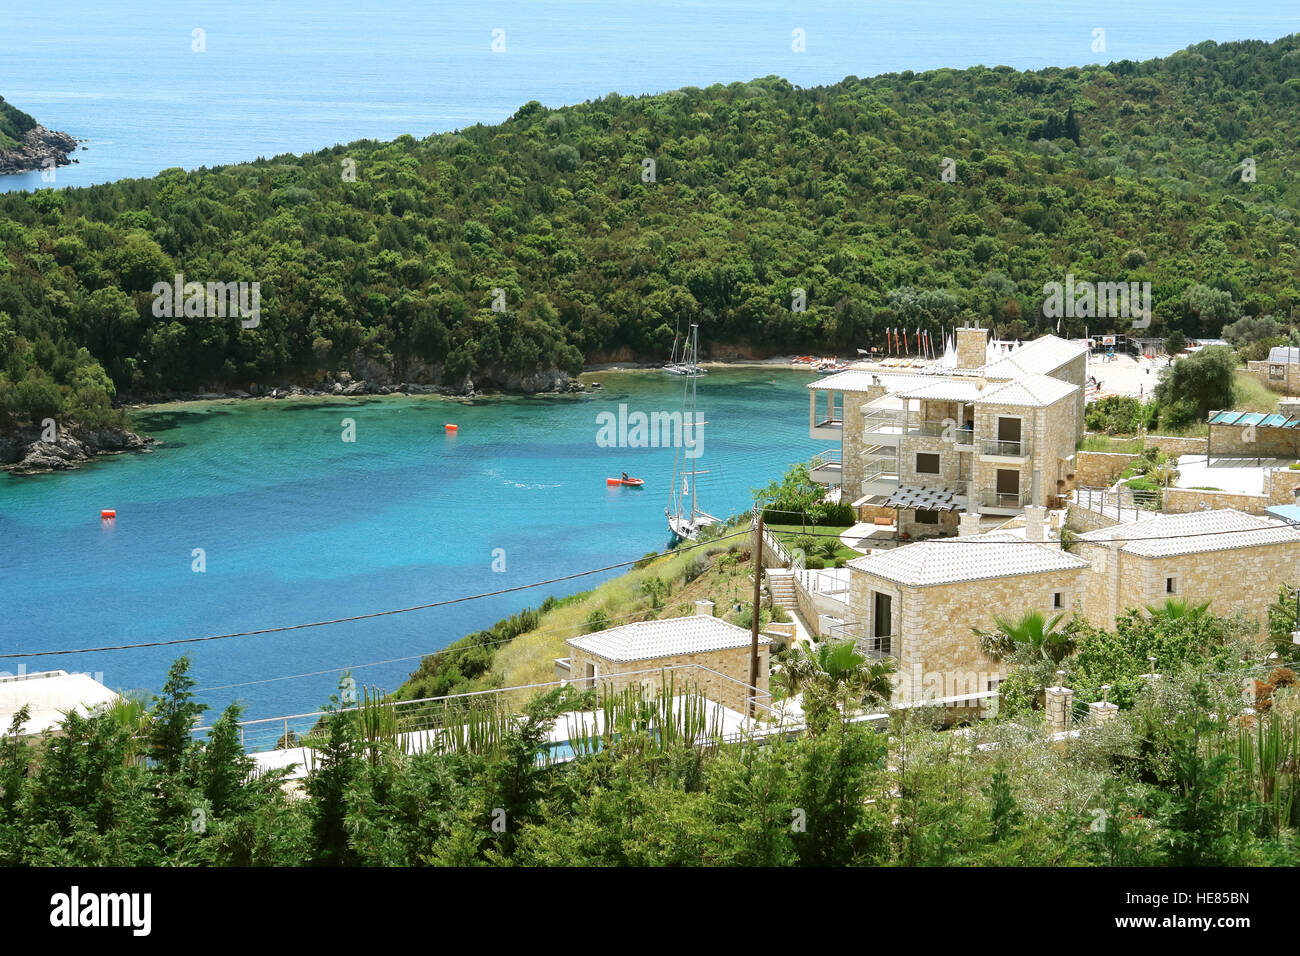 Sivota, GREECE, May 09, 2013: View of blue bay with green hills and yachts in the Ionian Sea in Greece. Stock Photo